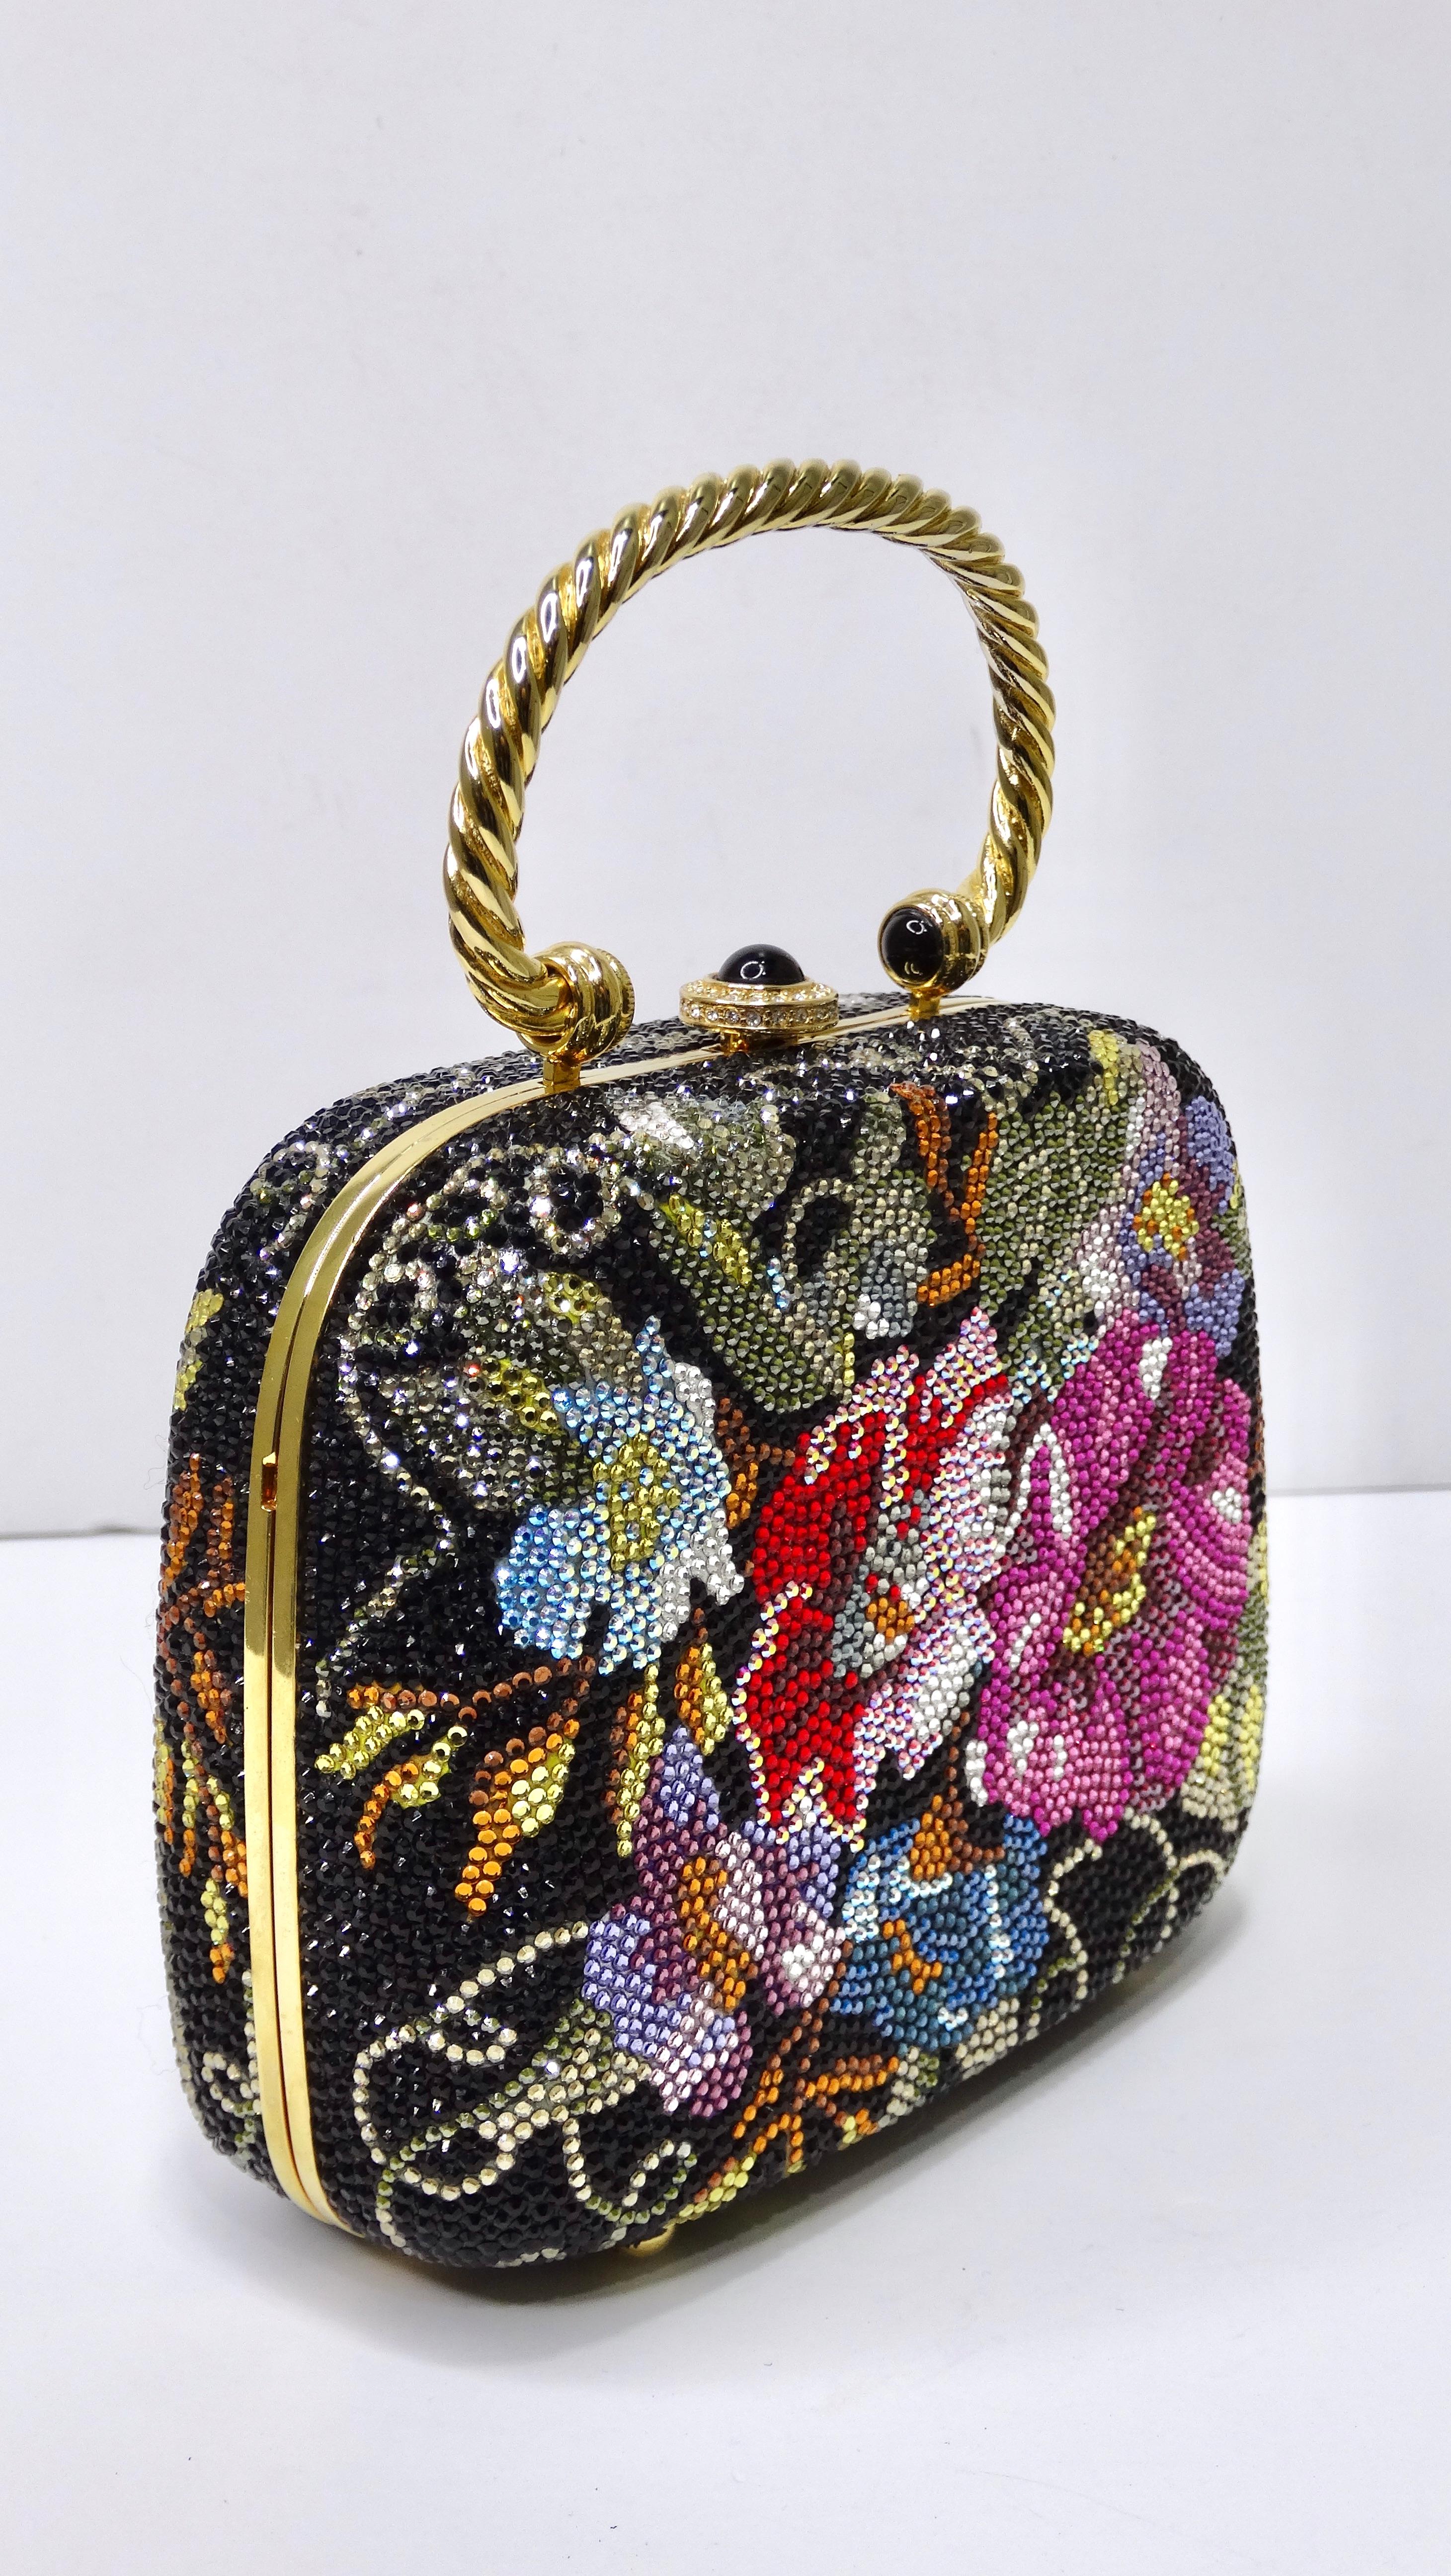 Elegance and glamor right this way! This is a highly designed handbag by none other than Judith Leiber that will be sure to catch people's attention from across the room. This is a BEAUTIFUL Judith Leiber flower motif Swarovski Crystal Minaudiere